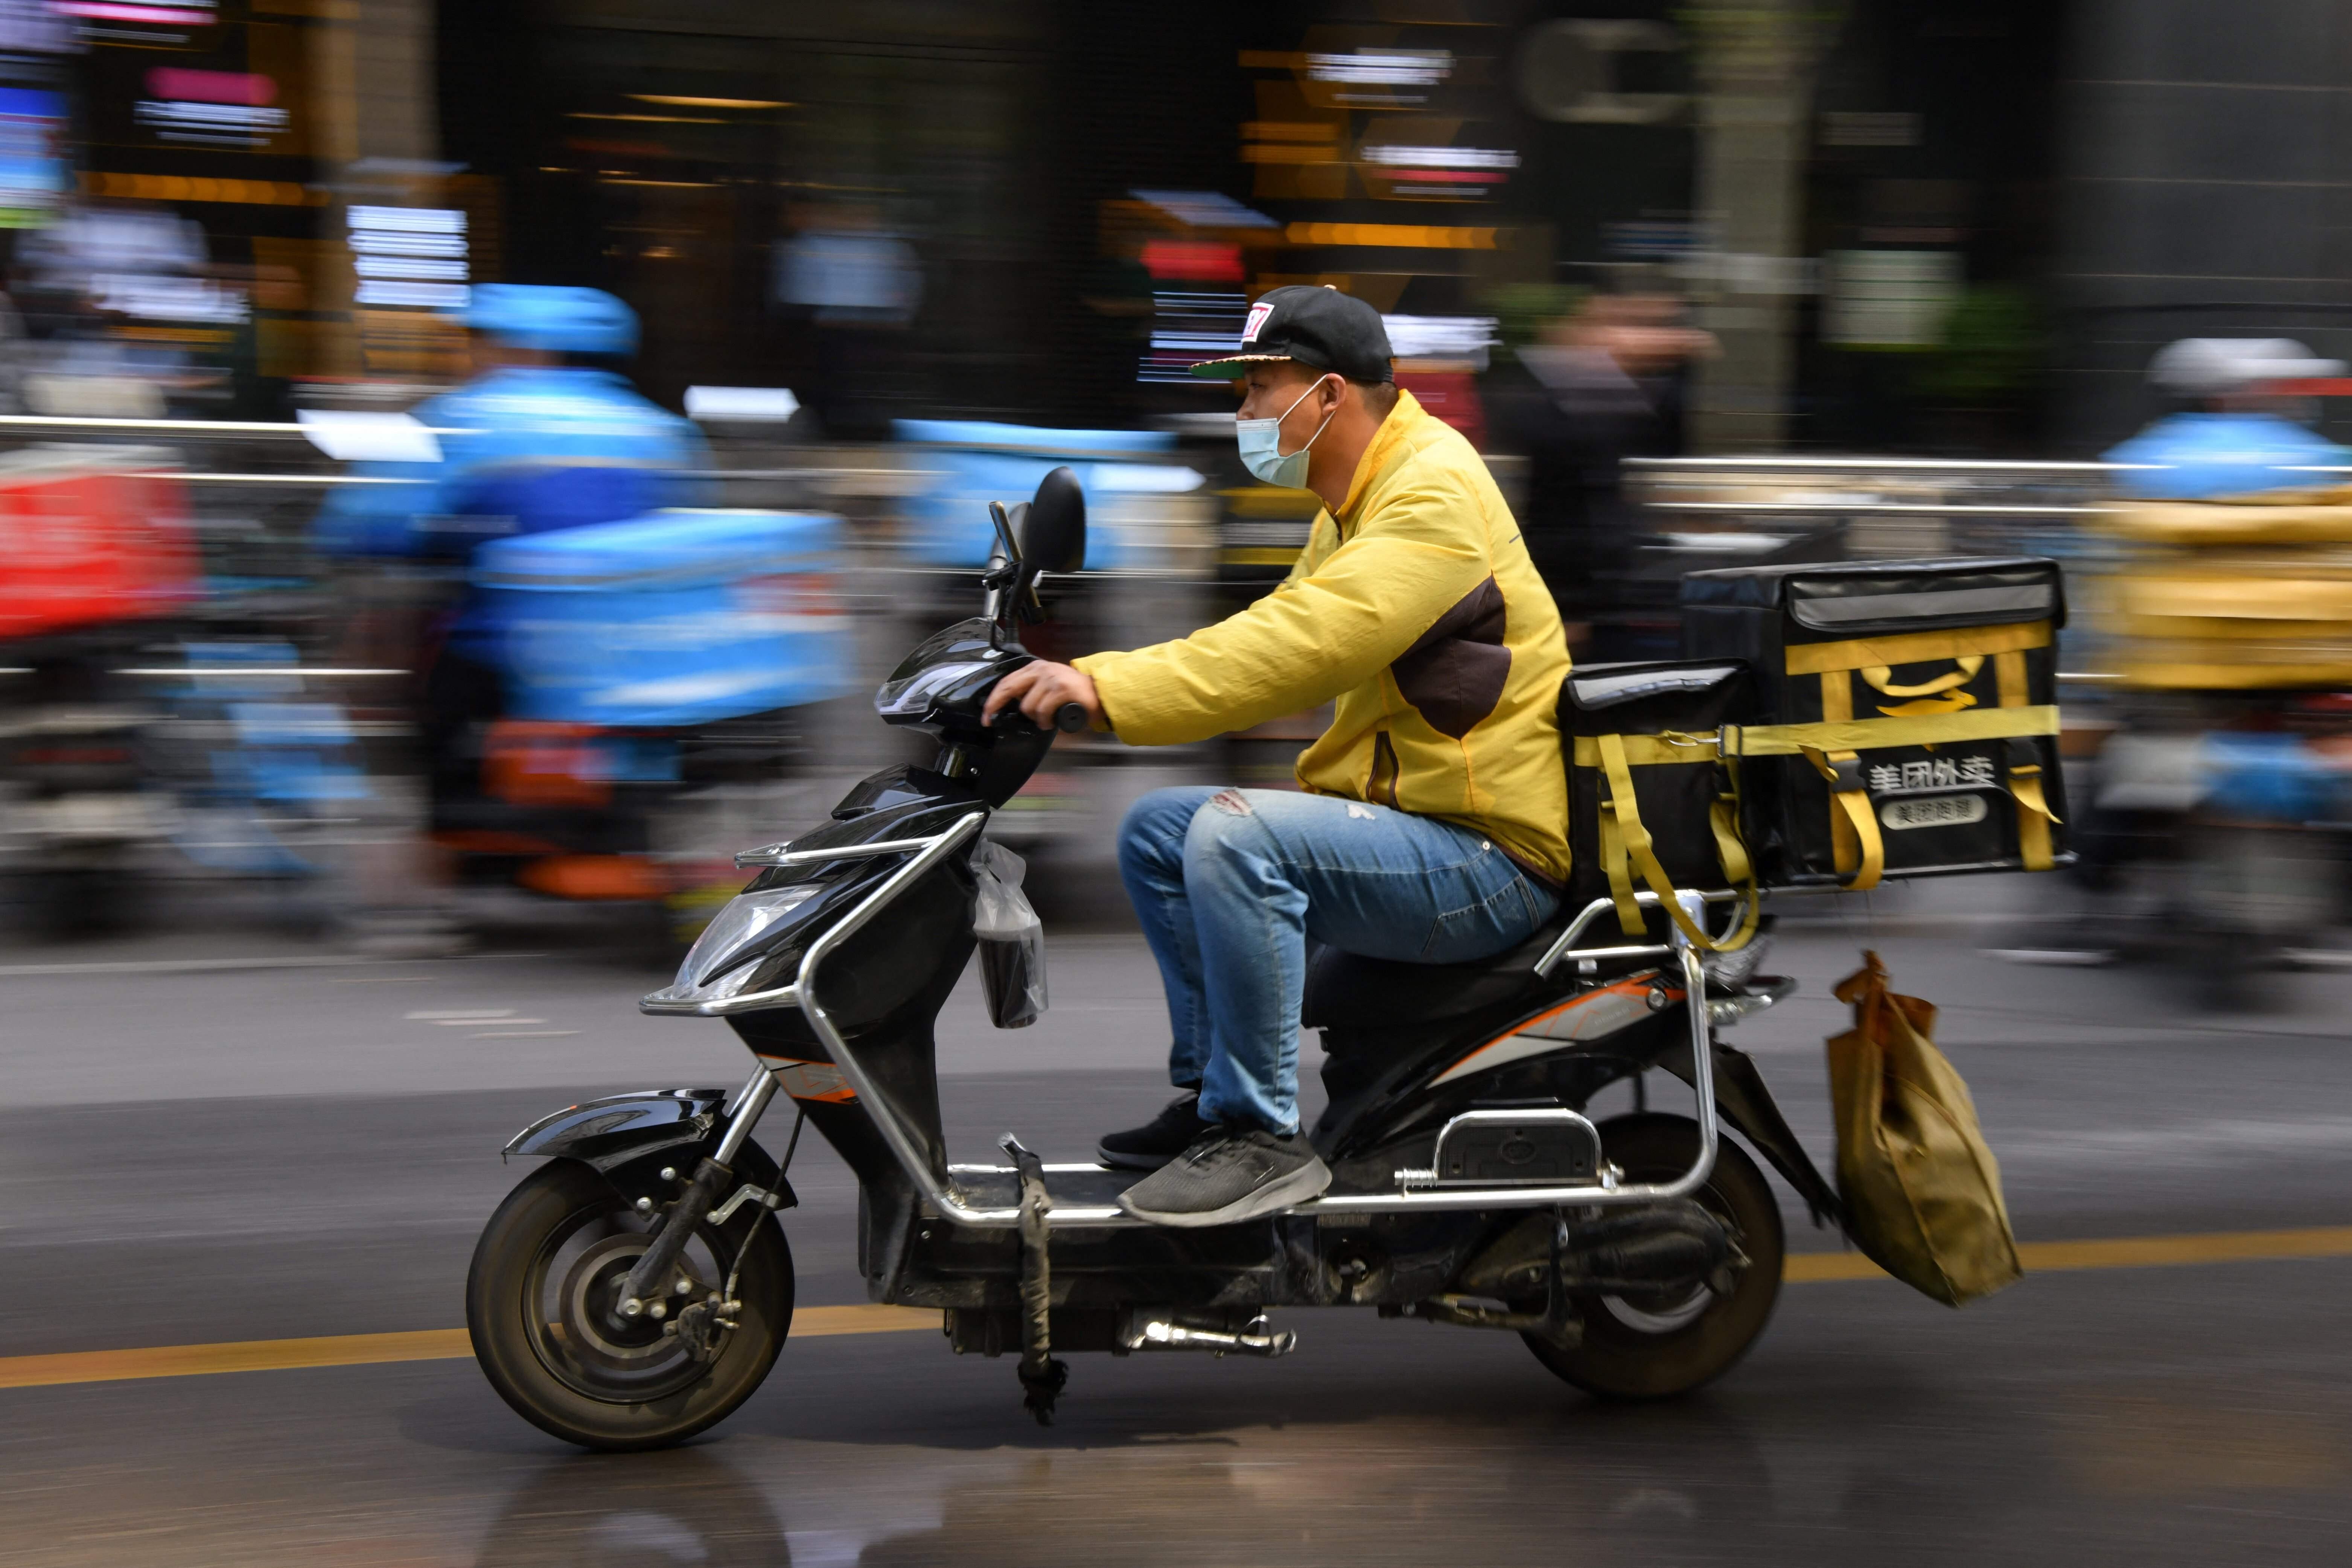 A delivery rider for Meituan, China's largest on-demand services provider, heads out to make a food delivery in Beijing on April 27, 2021. Photo: Agence France-Presse